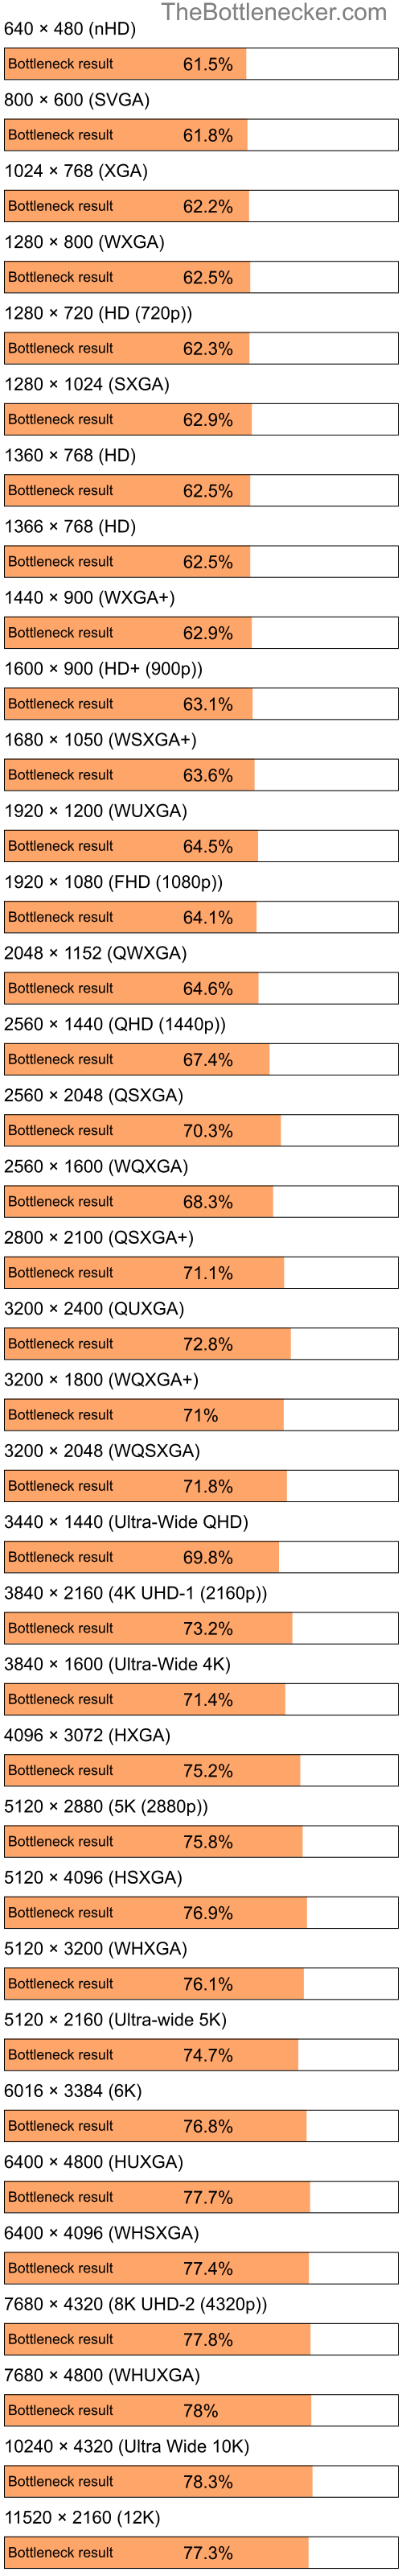 Bottleneck results by resolution for Intel Pentium 4 and AMD Mobility Radeon X1700 in General Tasks